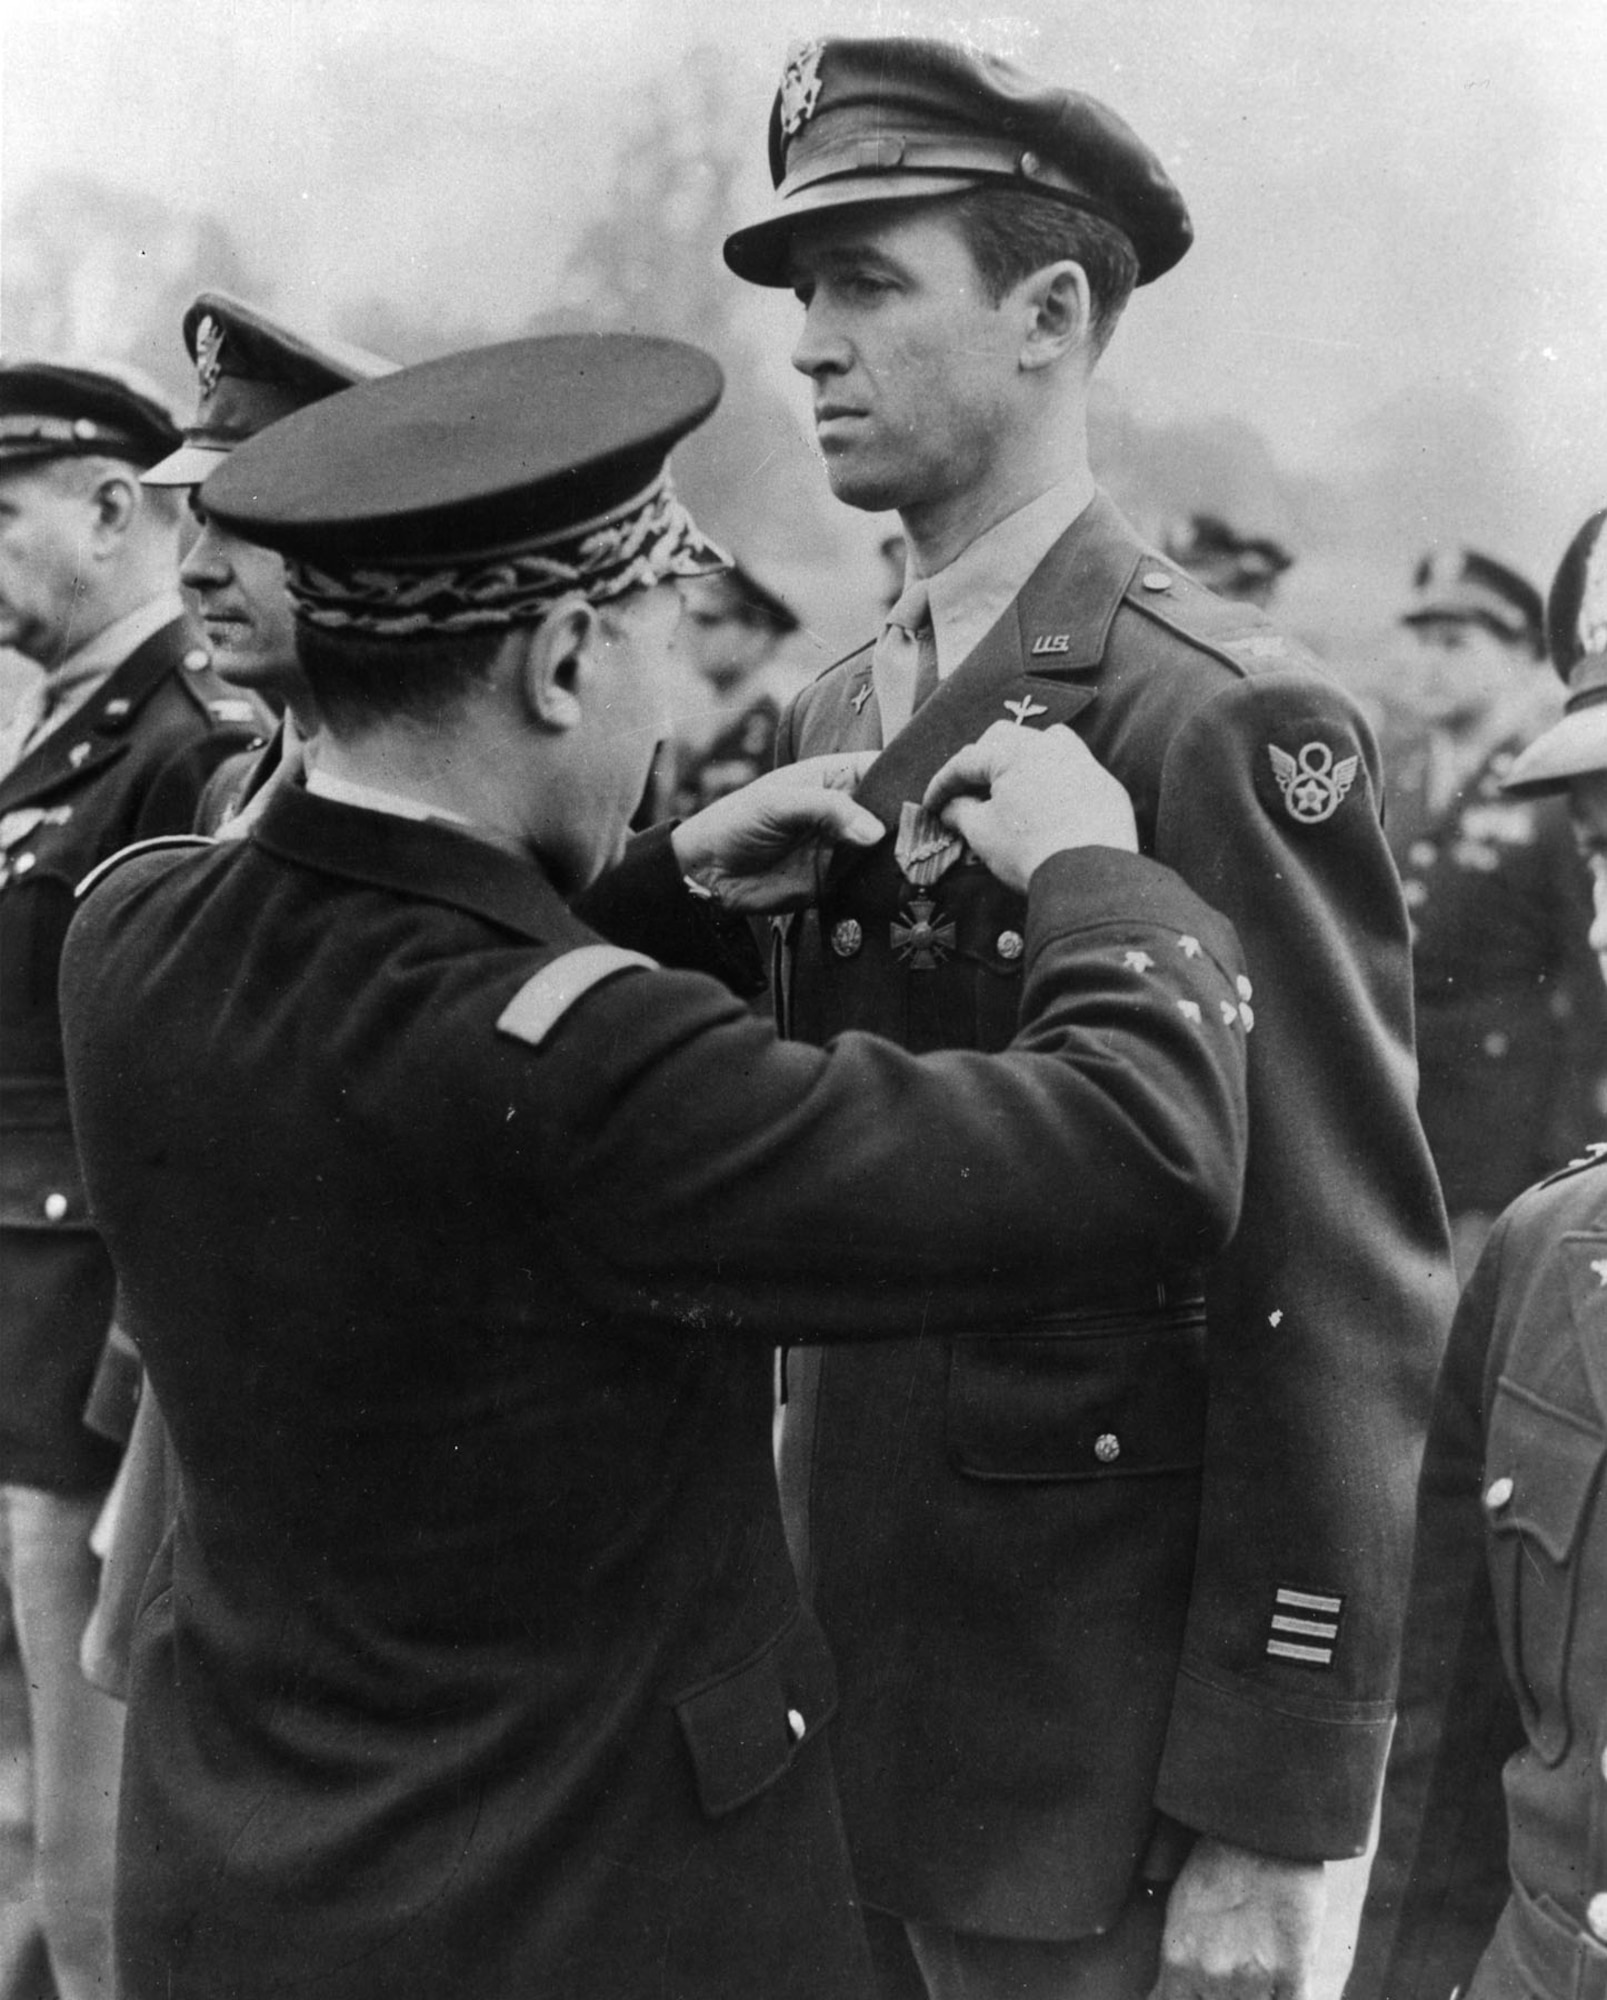 Lt. Gen. Valin, Chief of Staff, French Air Force, awards the Croix De Guerre with Palm to Col. Jimmy Stewart for exceptional services in the liberation. (U.S. Air Force photo)